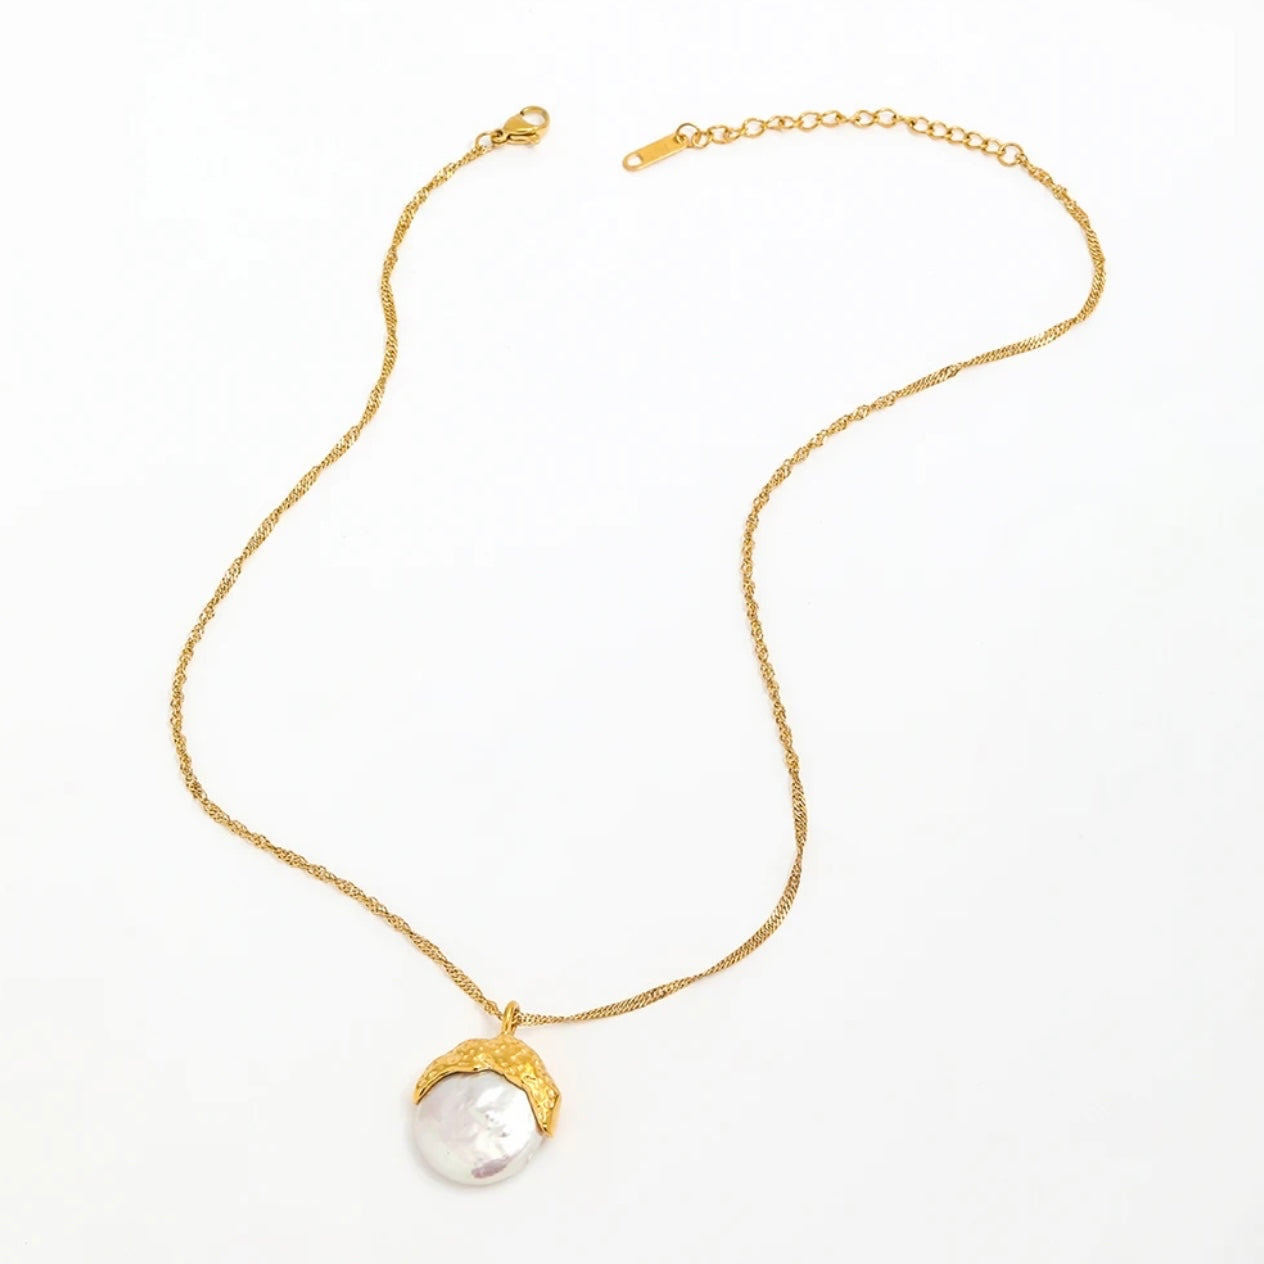 Eclipse freshwater pearl necklace